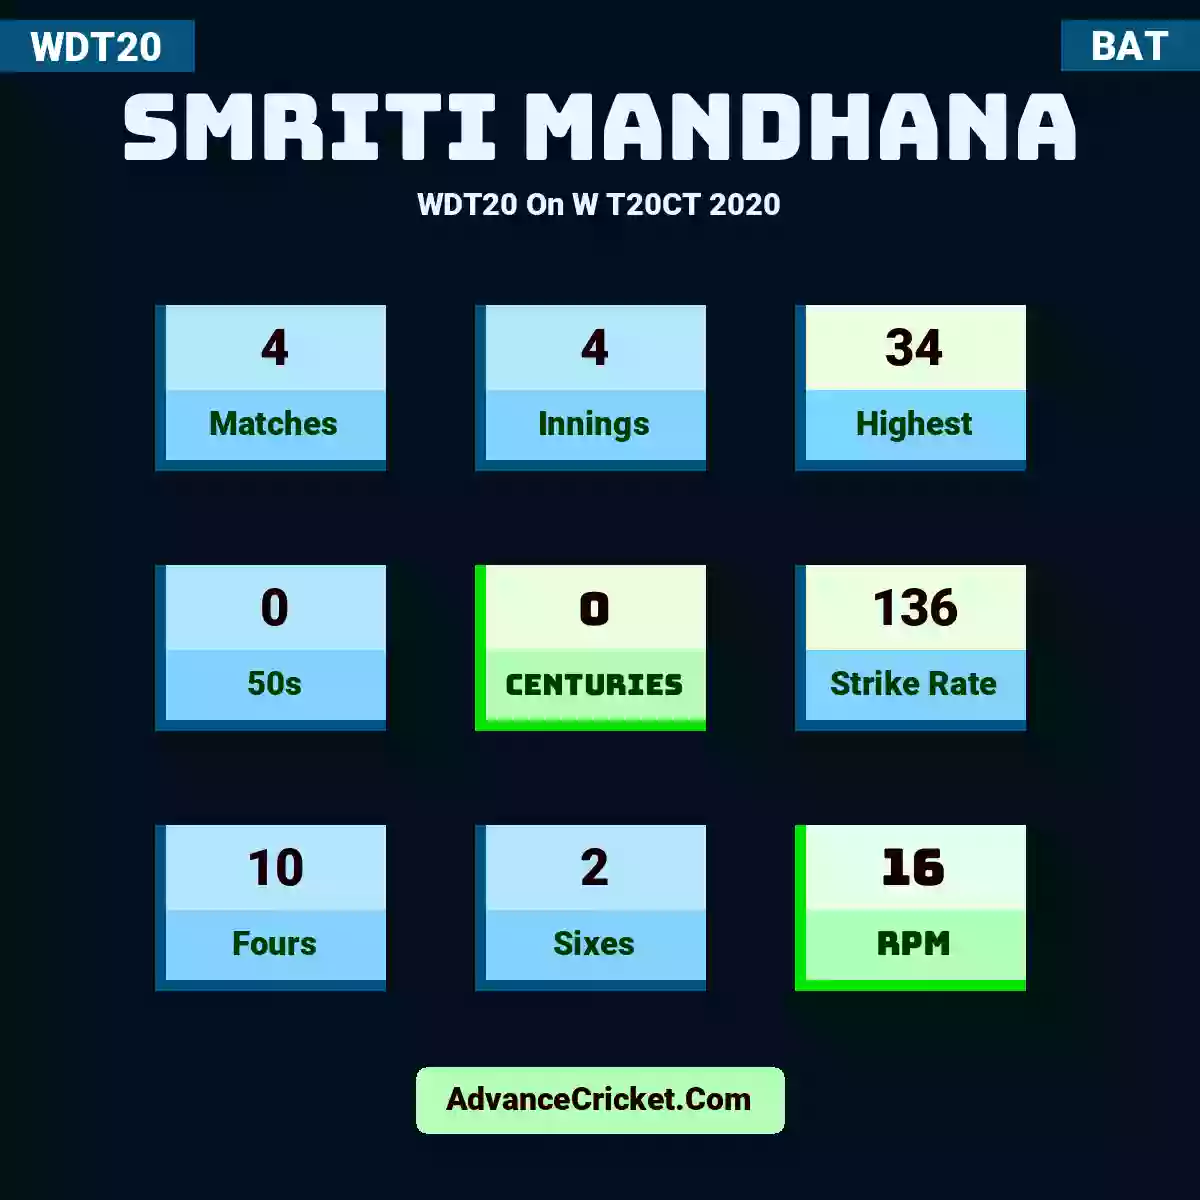 Smriti Mandhana WDT20  On W T20CT 2020, Smriti Mandhana played 4 matches, scored 34 runs as highest, 0 half-centuries, and 0 centuries, with a strike rate of 136. S.Mandhana hit 10 fours and 2 sixes, with an RPM of 16.